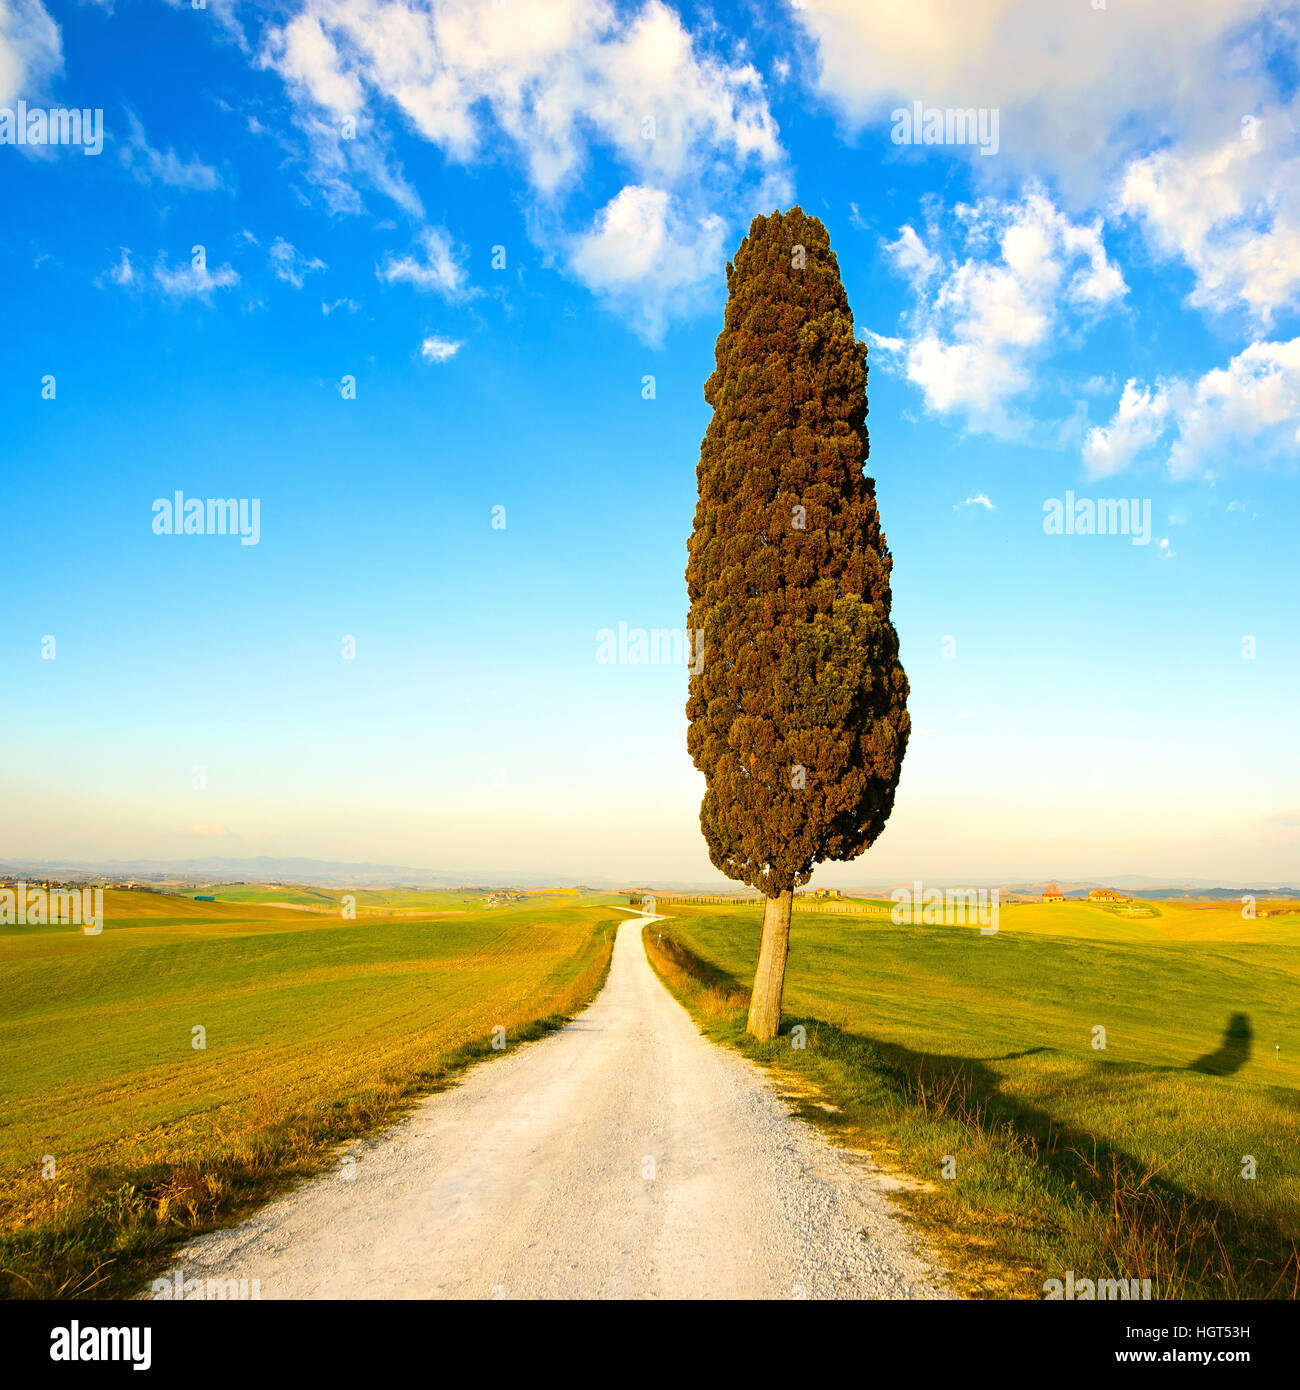 Tuscany, lonely cypress tree and white rural road on sunset. Siena, Orcia Valley, Italy, Europe. Stock Photo